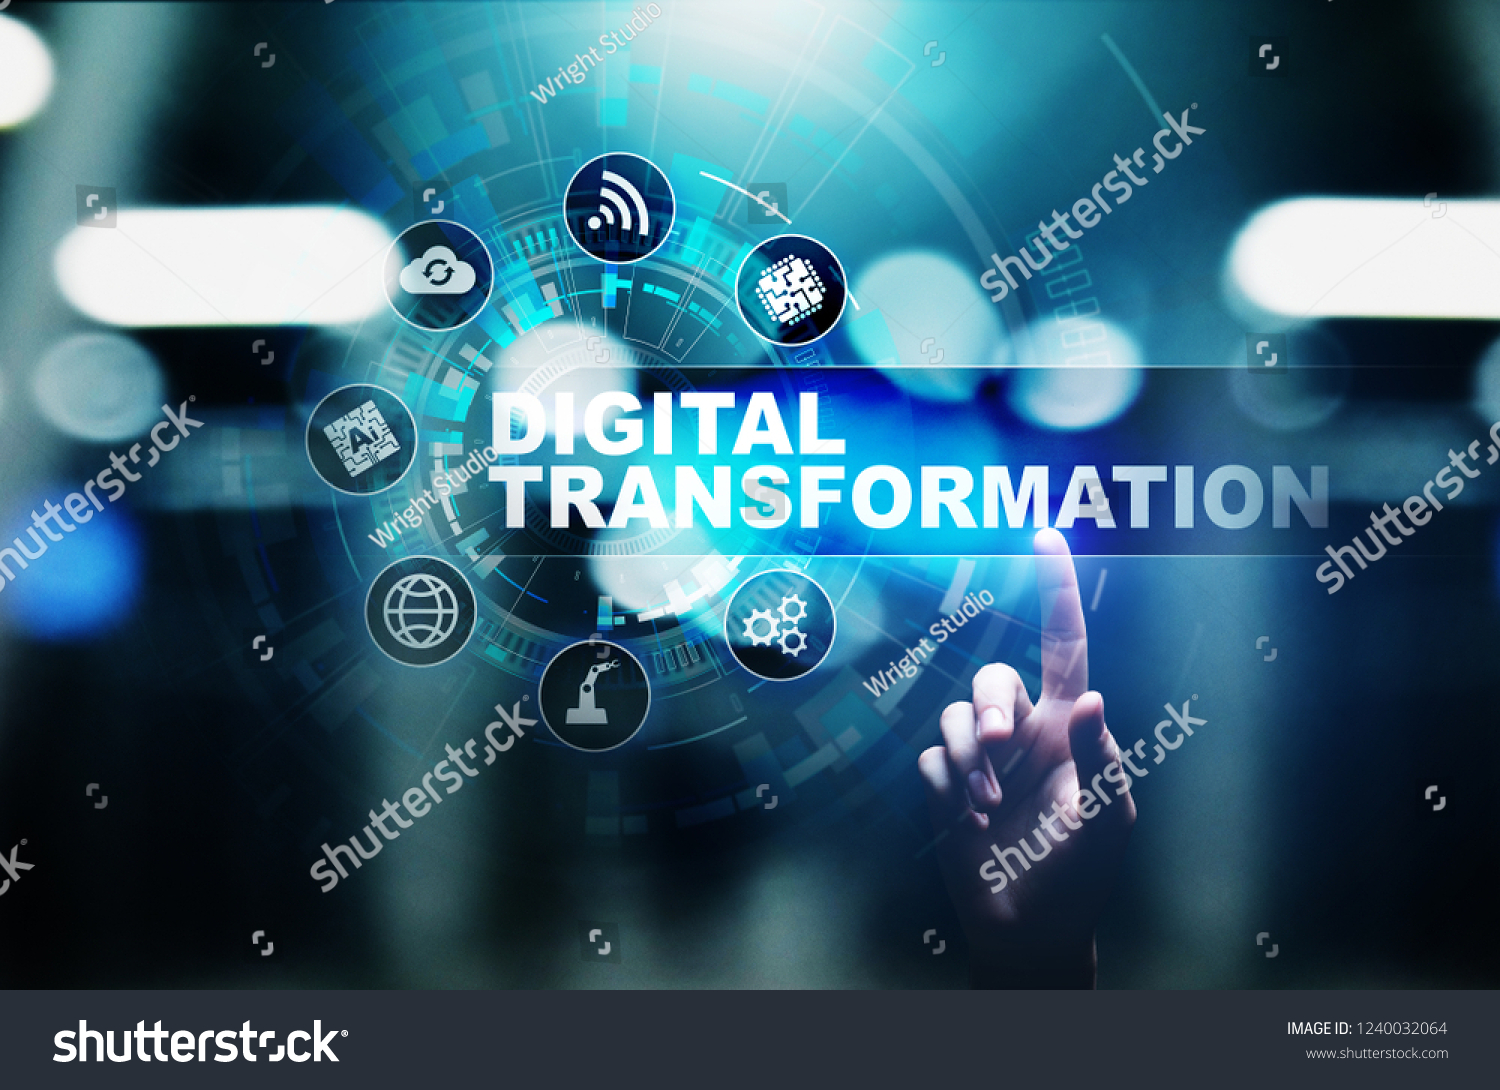 Digital transformation, disruption, innovation. Business and  modern technology concept. #1240032064